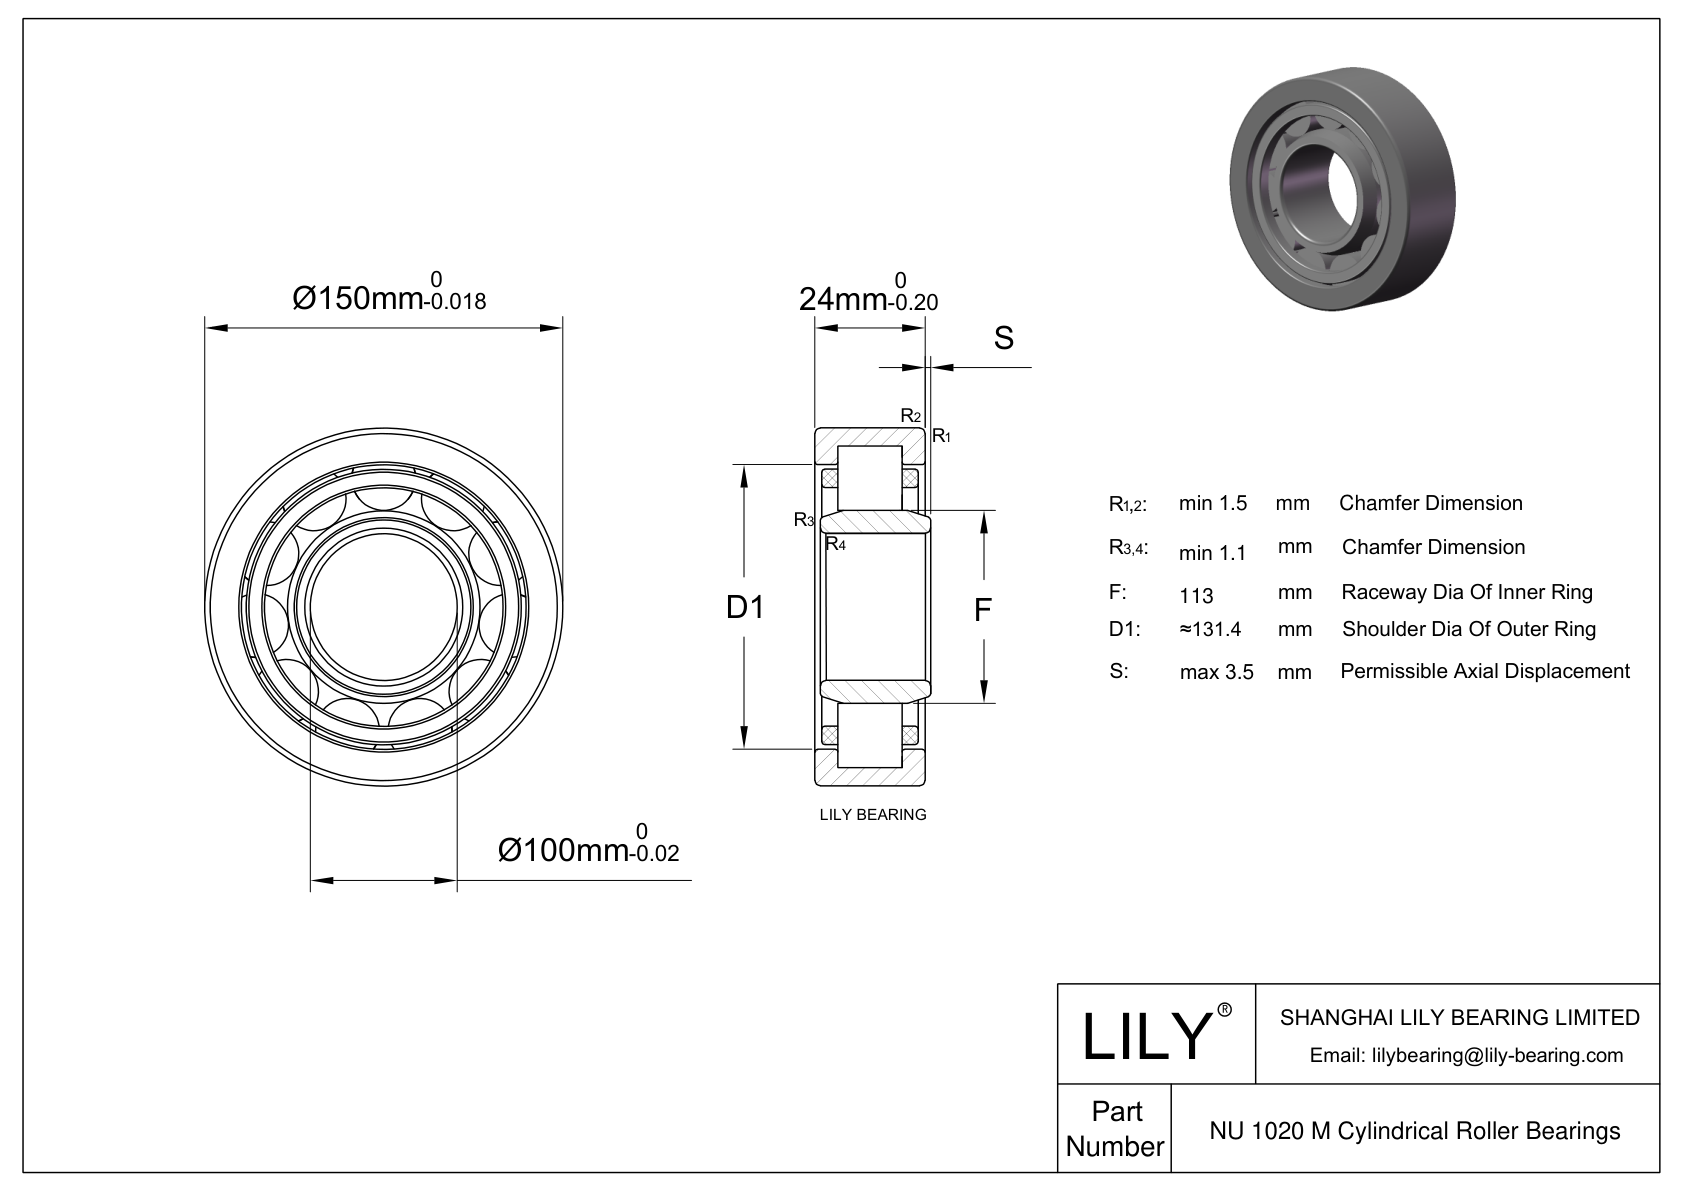 NU 1020 M/C3VL0241 Ceramic Coated Cylindrical Roller Bearings cad drawing